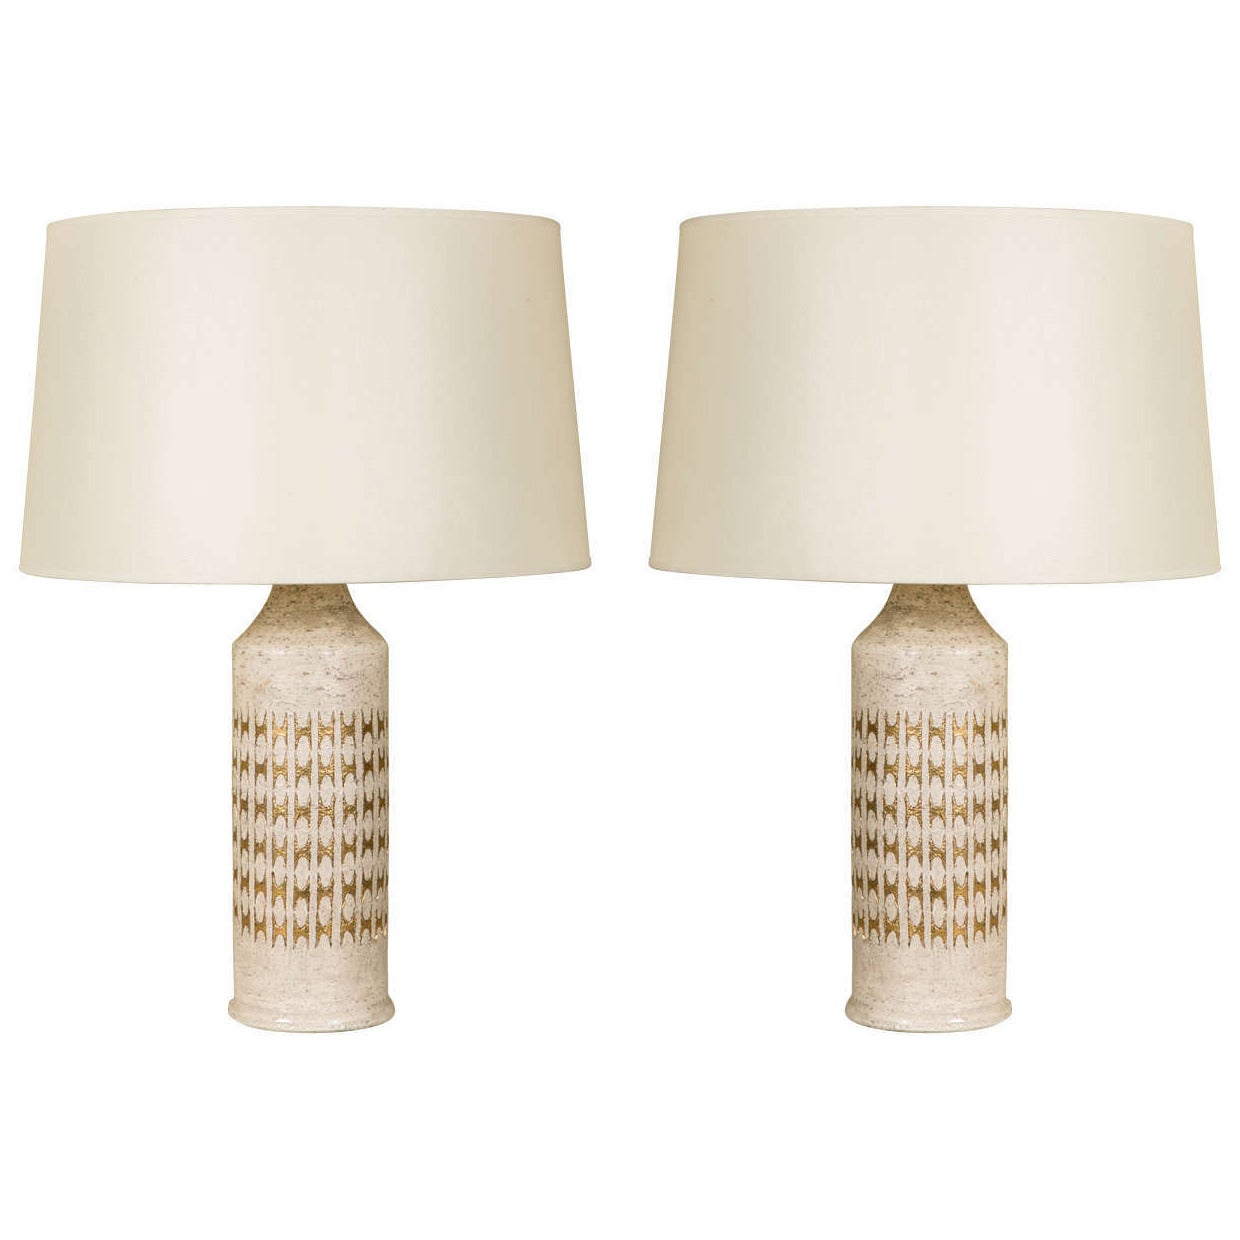 Pair of Bergboms Ivory Glazed and Gold Ceramic Table Lamps, Sweden, circa 1960 For Sale